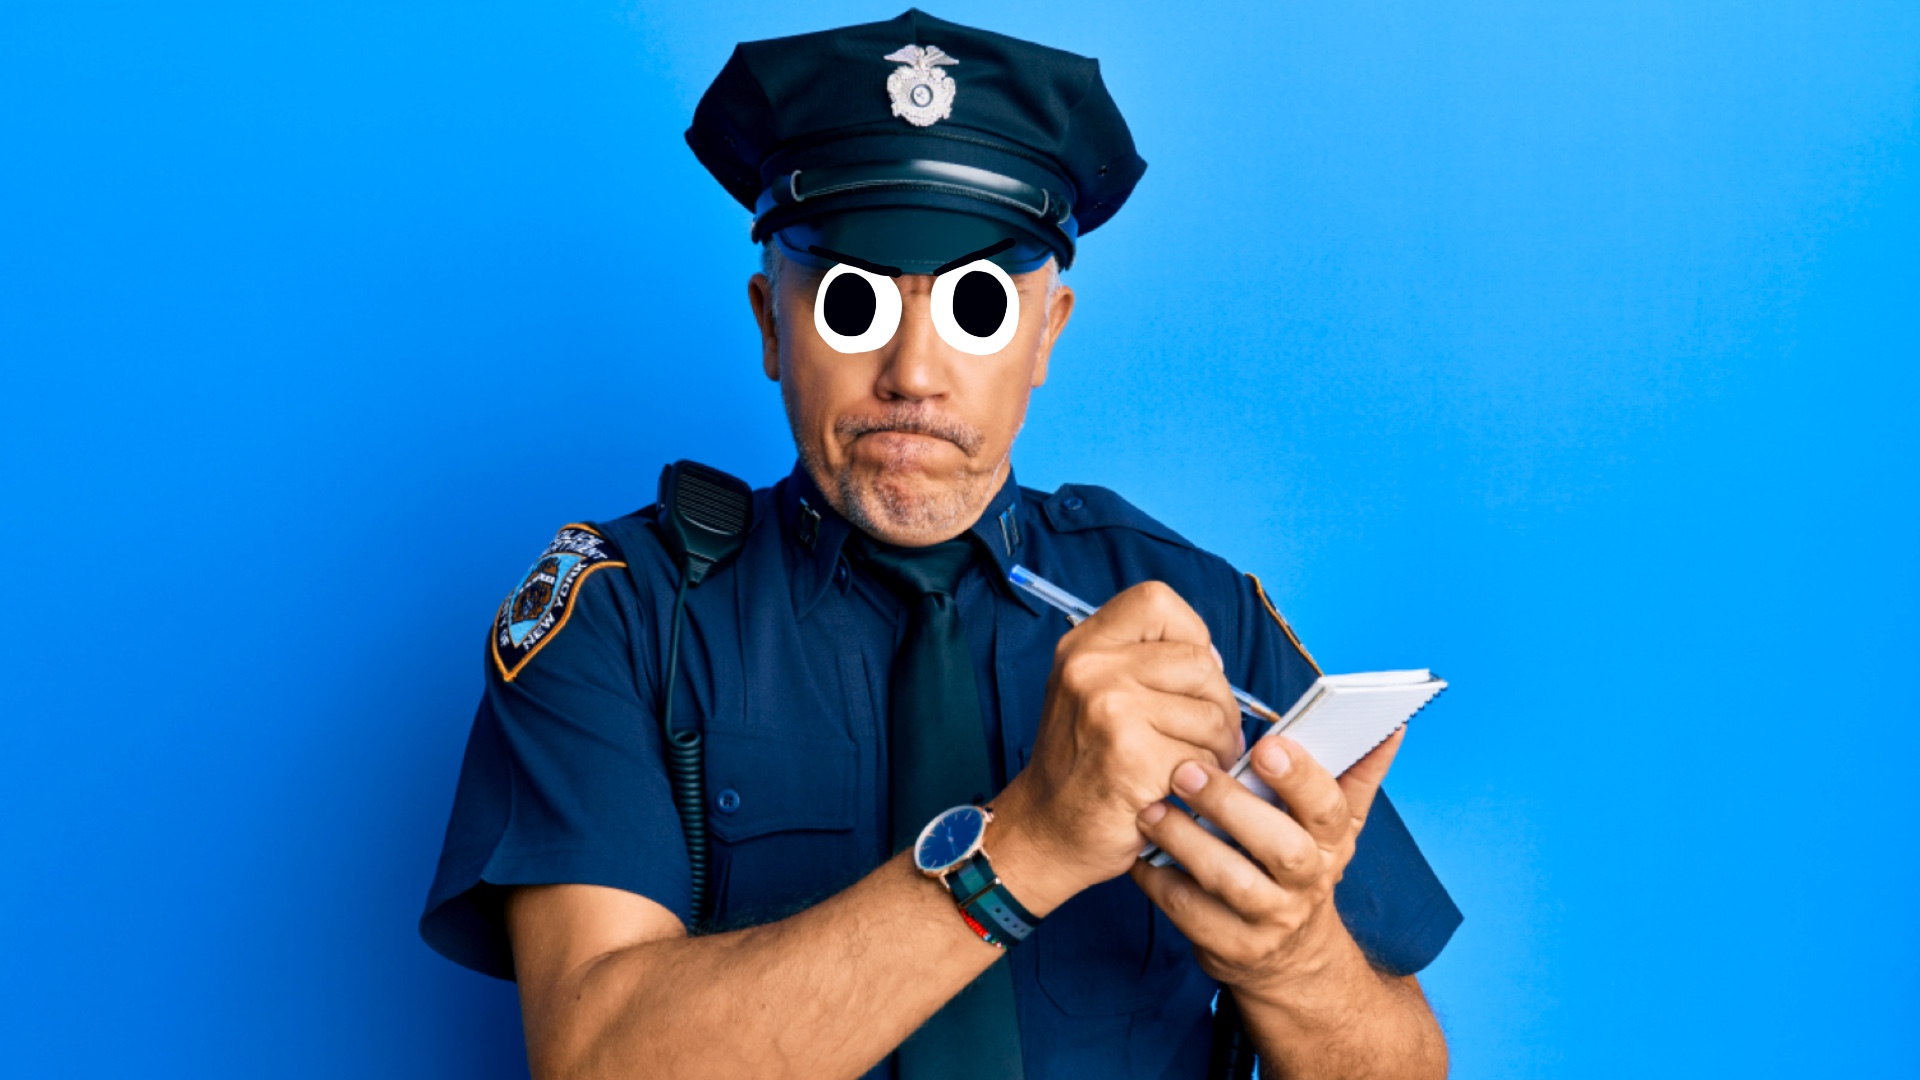 A police officer on a blue background